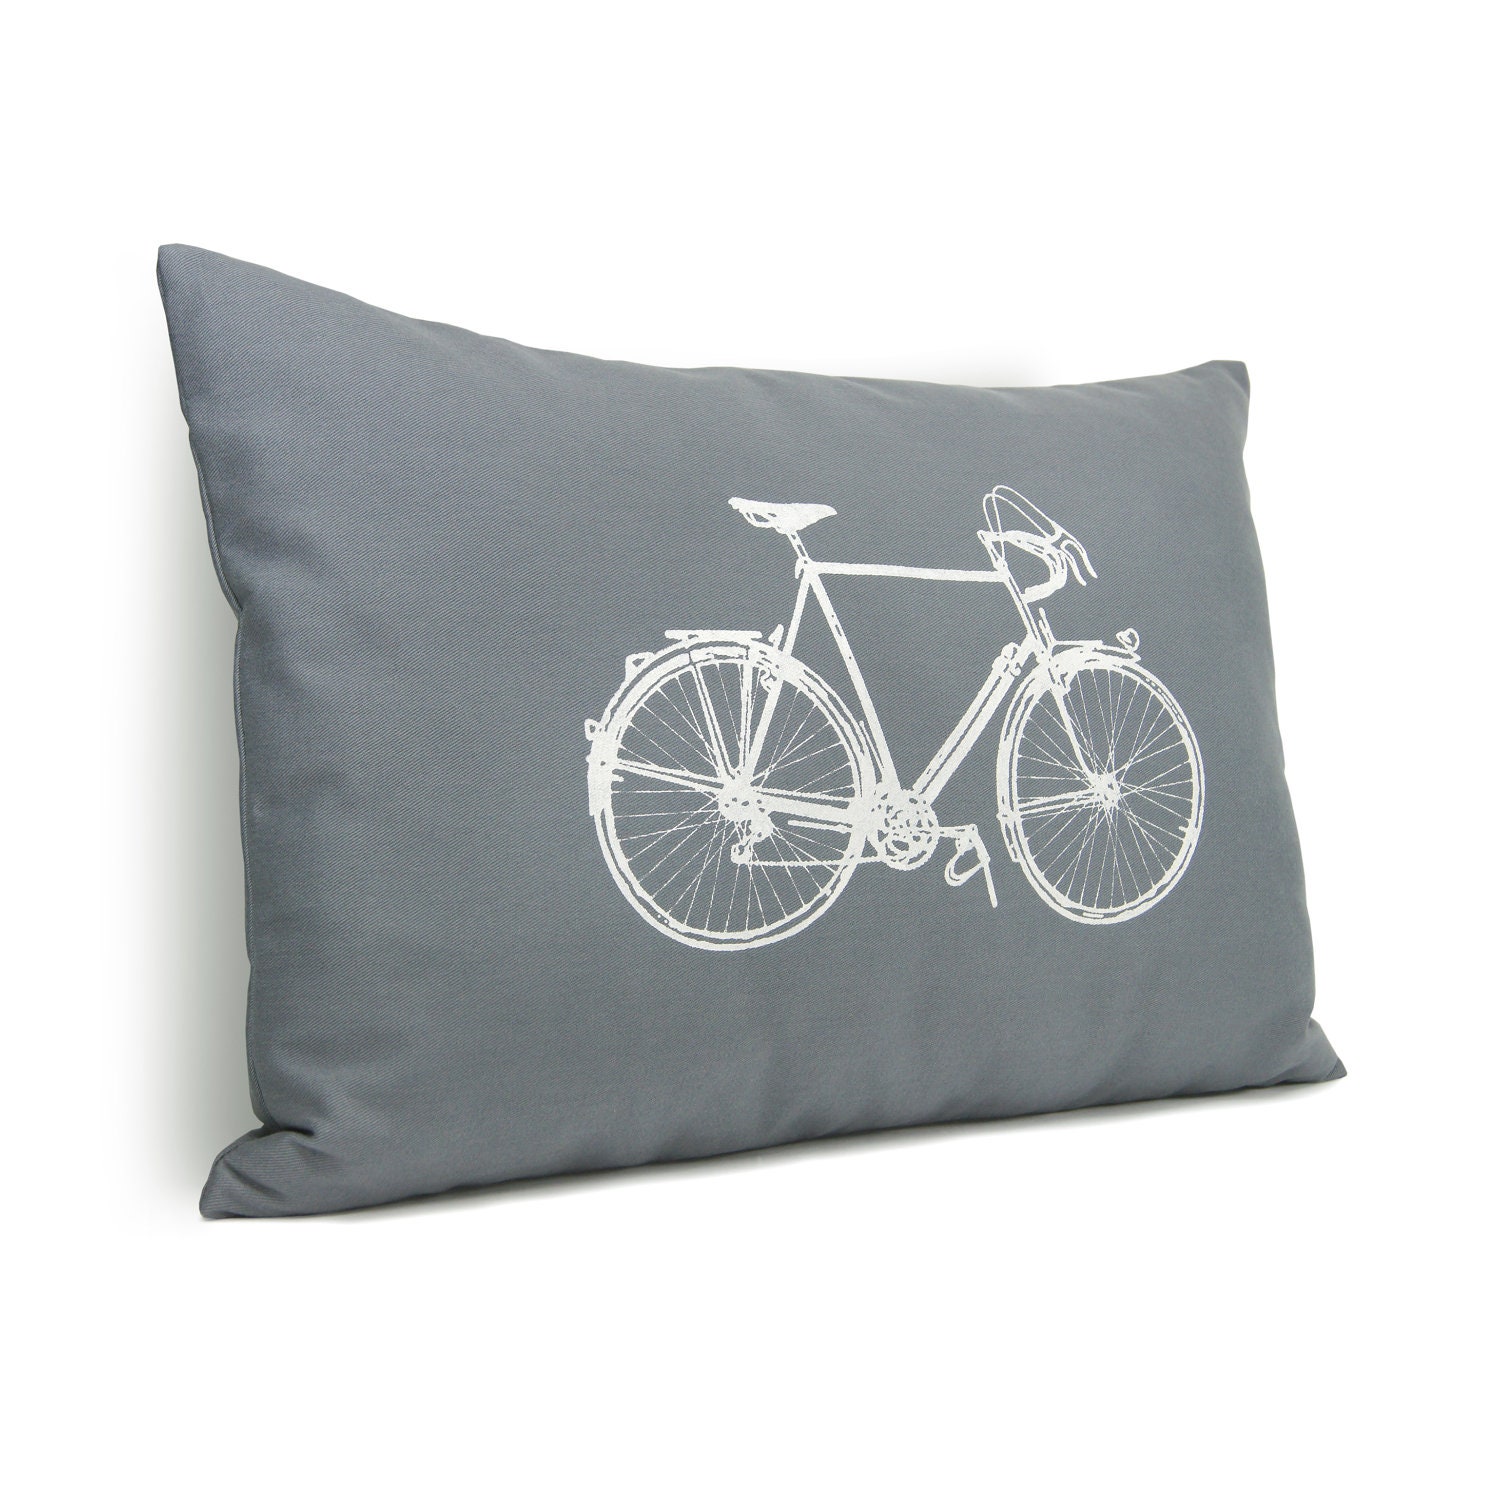 Gray and white decorative pillow cover - White vintage bicycle print on medium grey twill fabric - 12x16 lumbar pillow cover - ClassicByNature